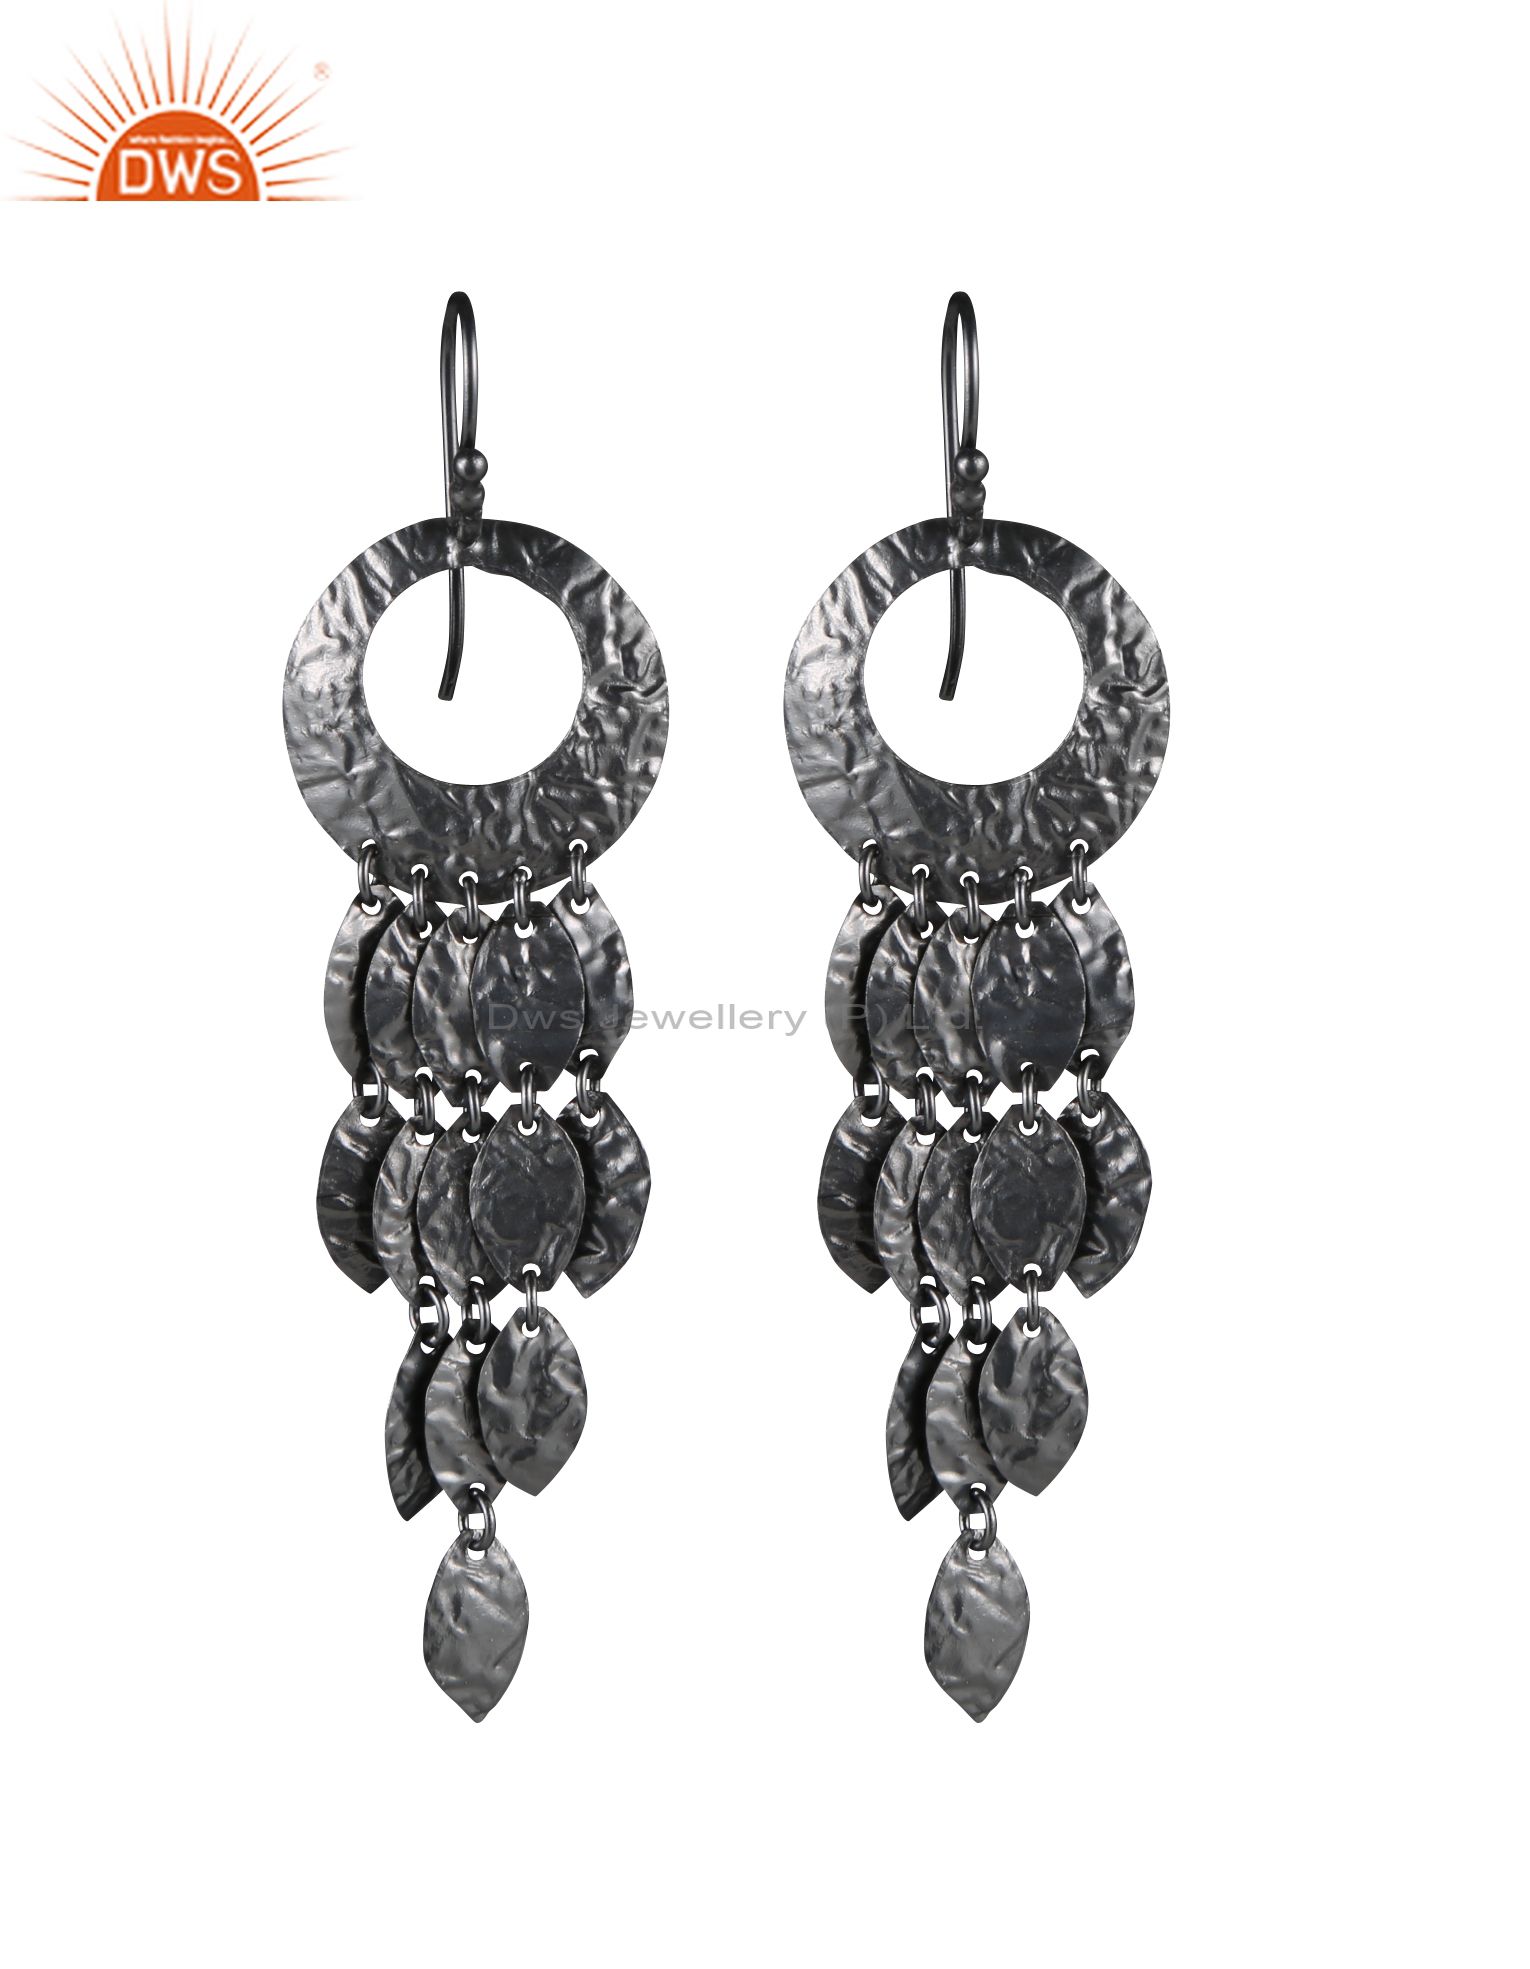 Handcrafted Sterling Silver With Oxidized Petals Designer Chandelier Earrings